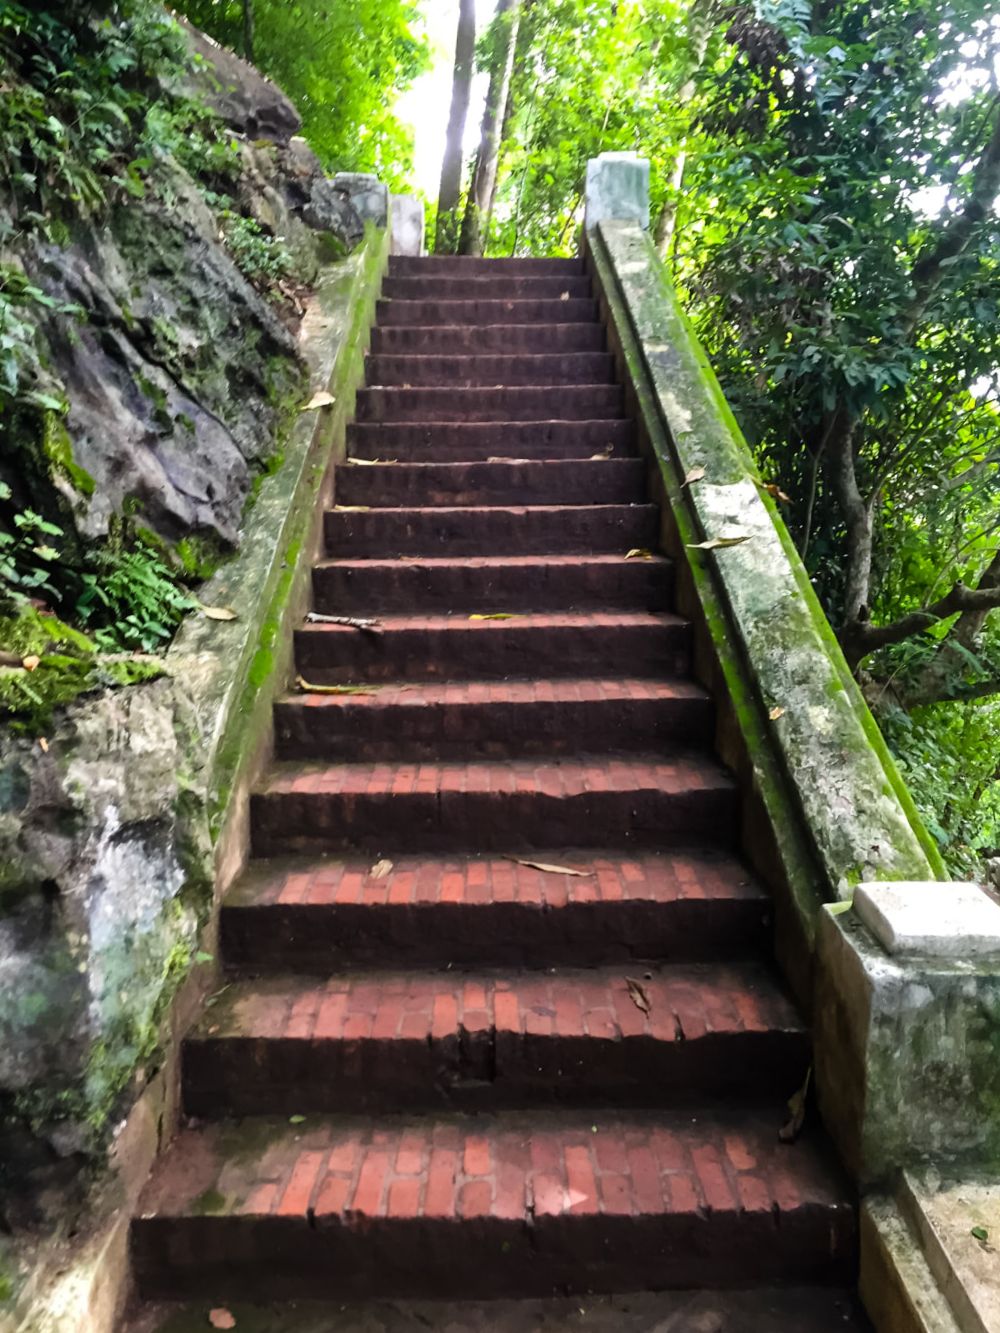 The stairs leading up to the summit of Mount Phousi (Sisavangvong Road entry). Luang Prabang, Laos.